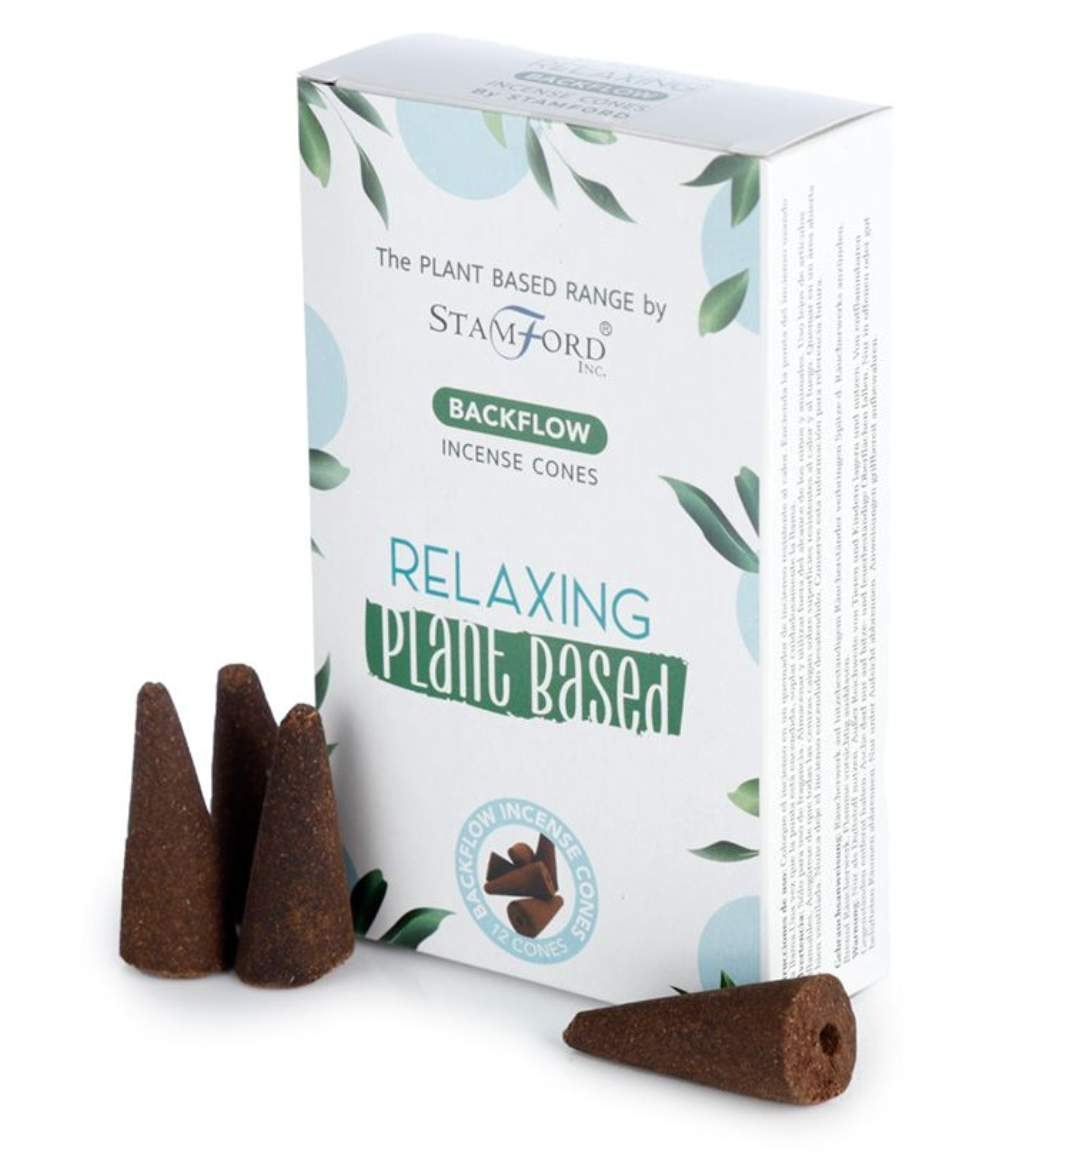 Relaxing Backflow Incense Cones-FREE Shipping over £35.00-